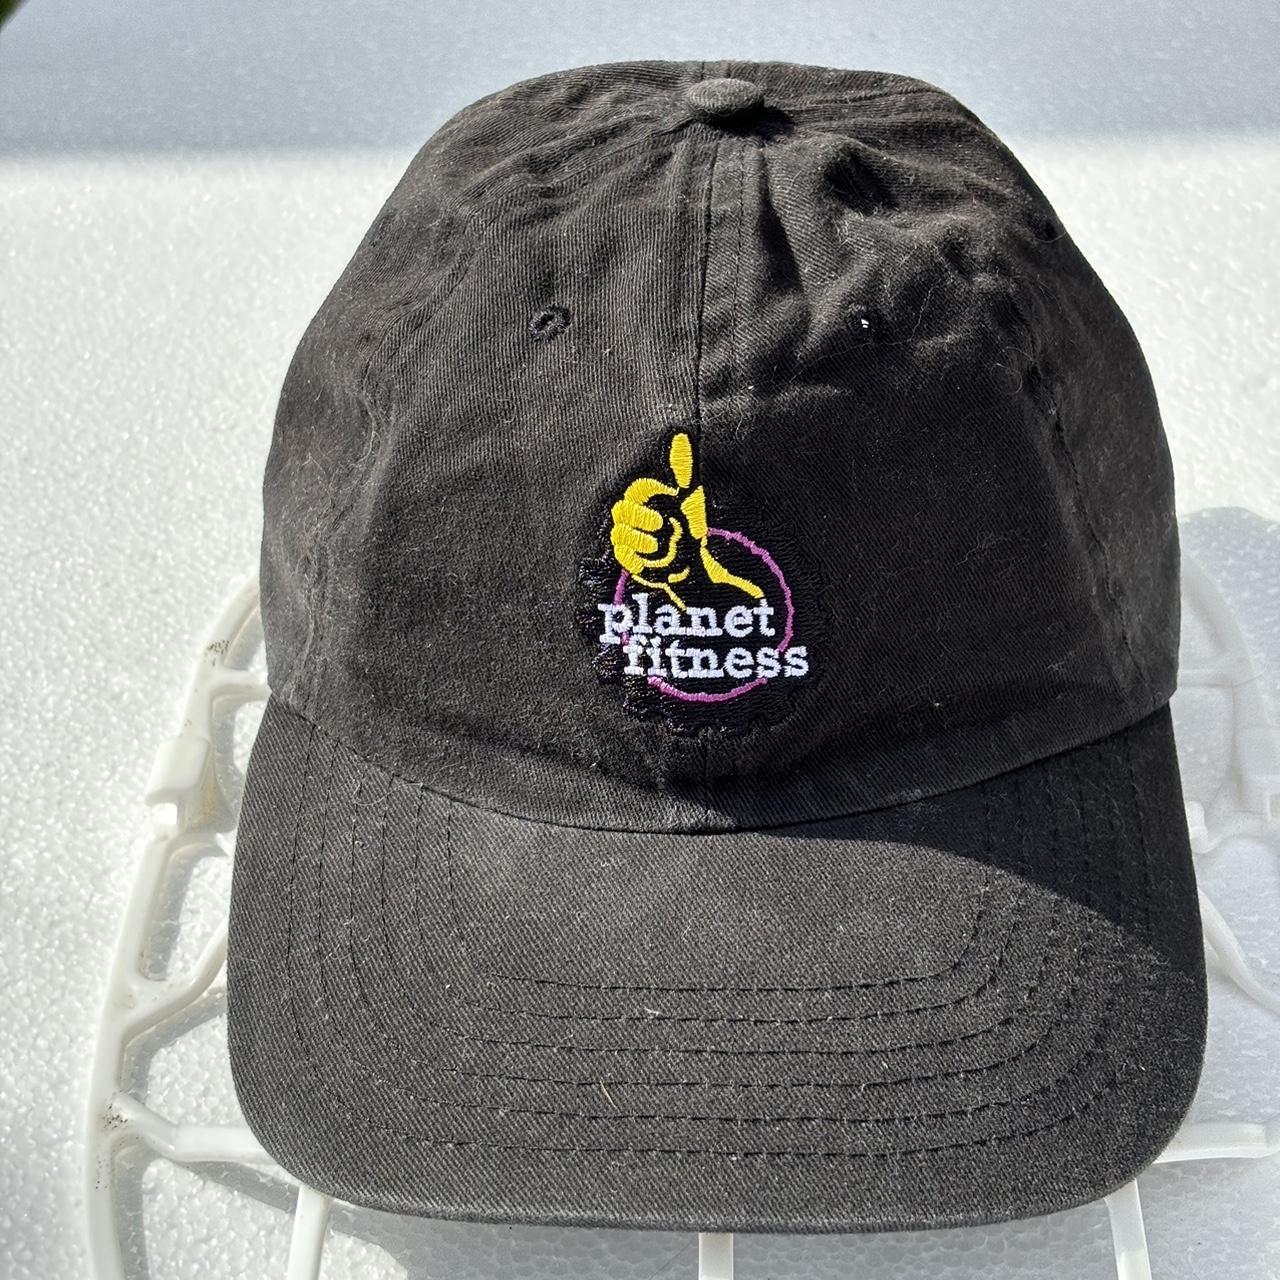 Planet Fitness hat. This black cap is adjustable